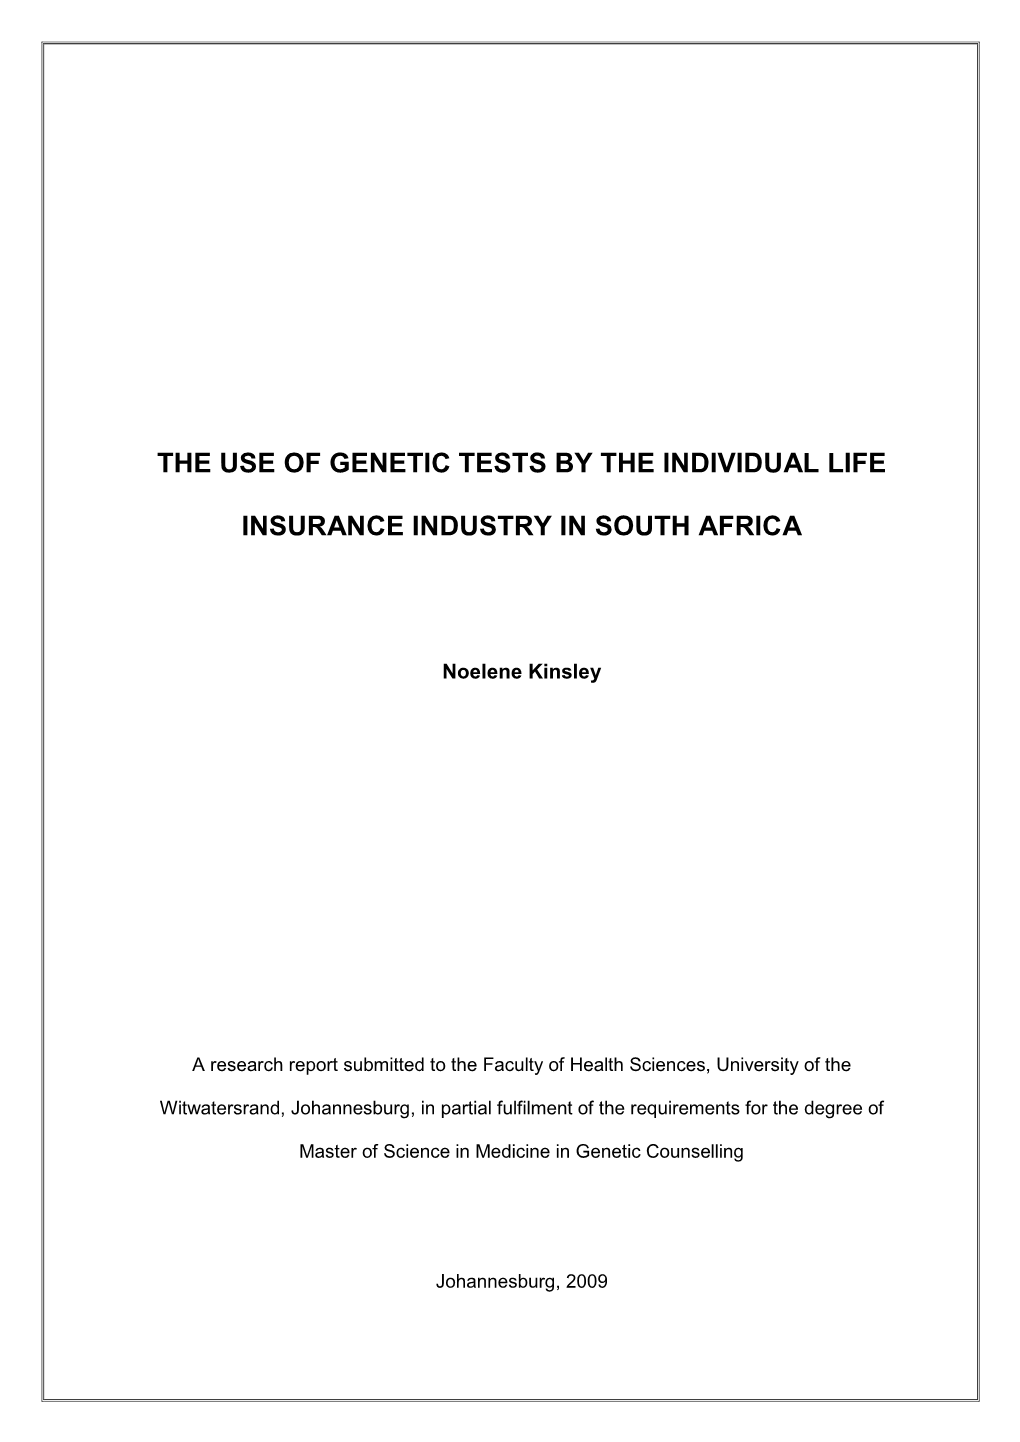 The Use of Genetic Tests by the Individual Life Insurance Industry in South Africa